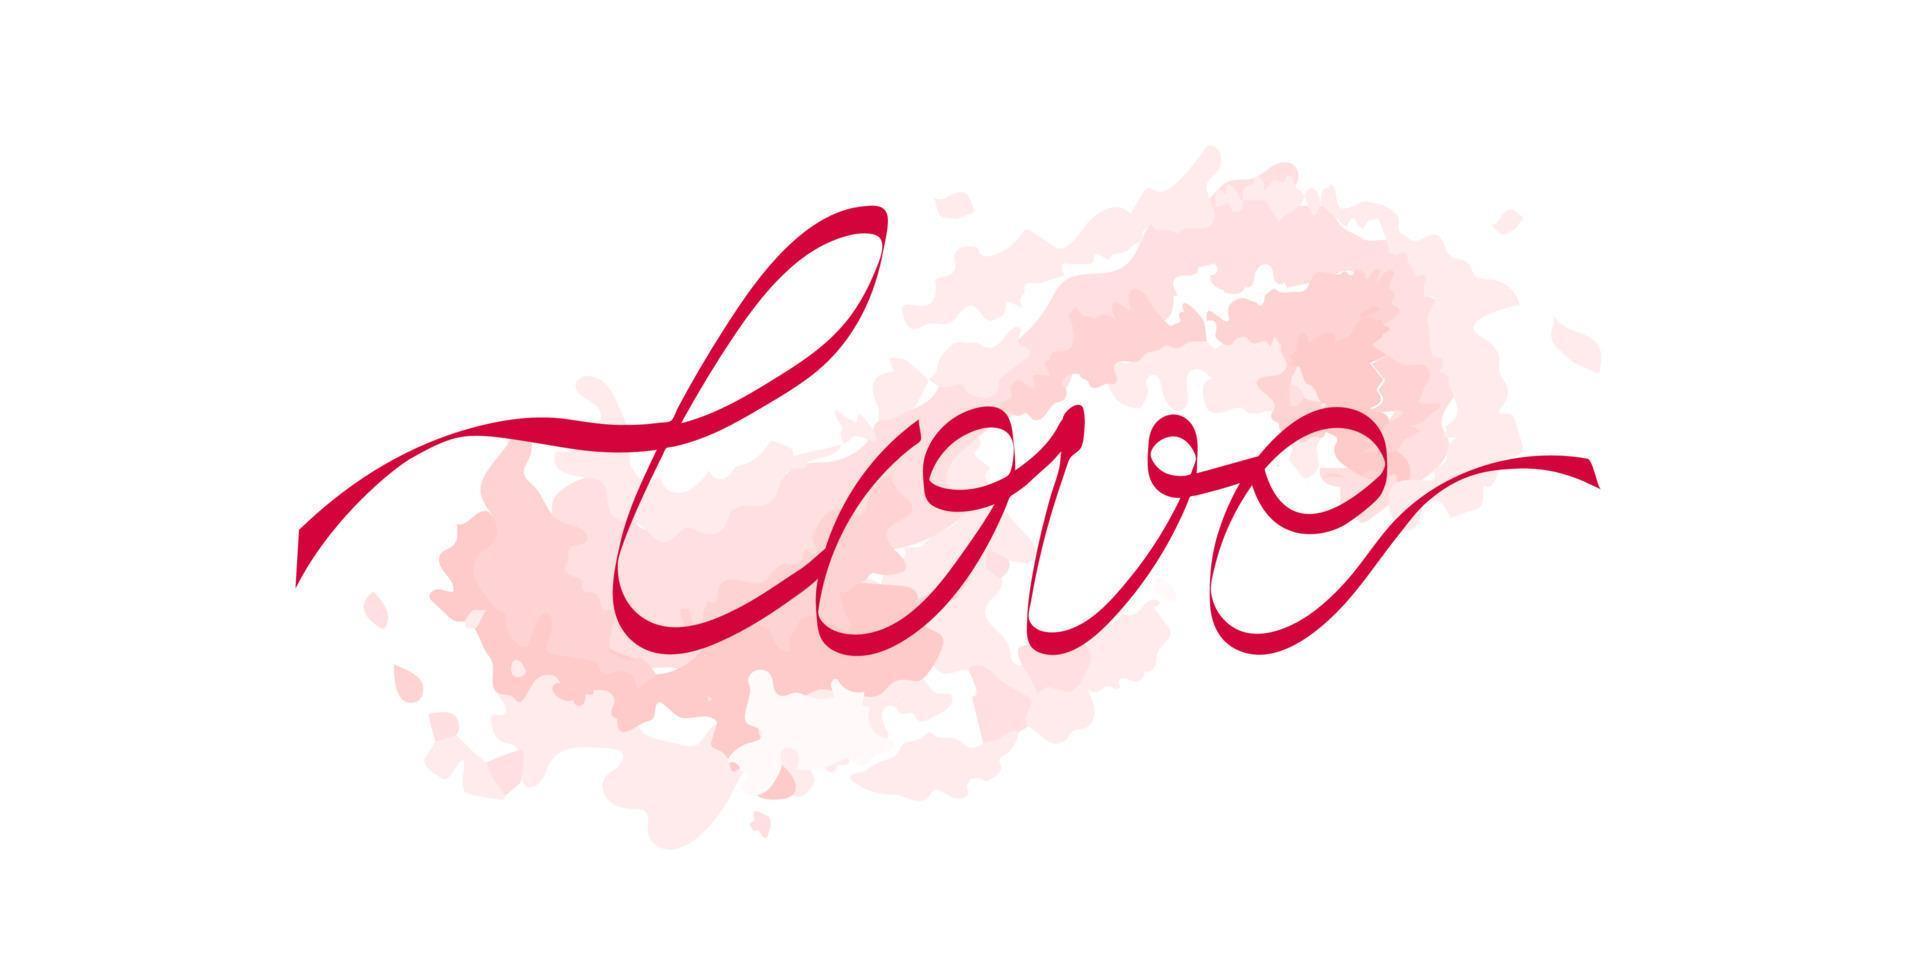 Word Love, lettering written by flying red ribbon or red thread of destiny, on pink splash, brush stroke background with scattered drops. Cute isolated design element for prints, web vector